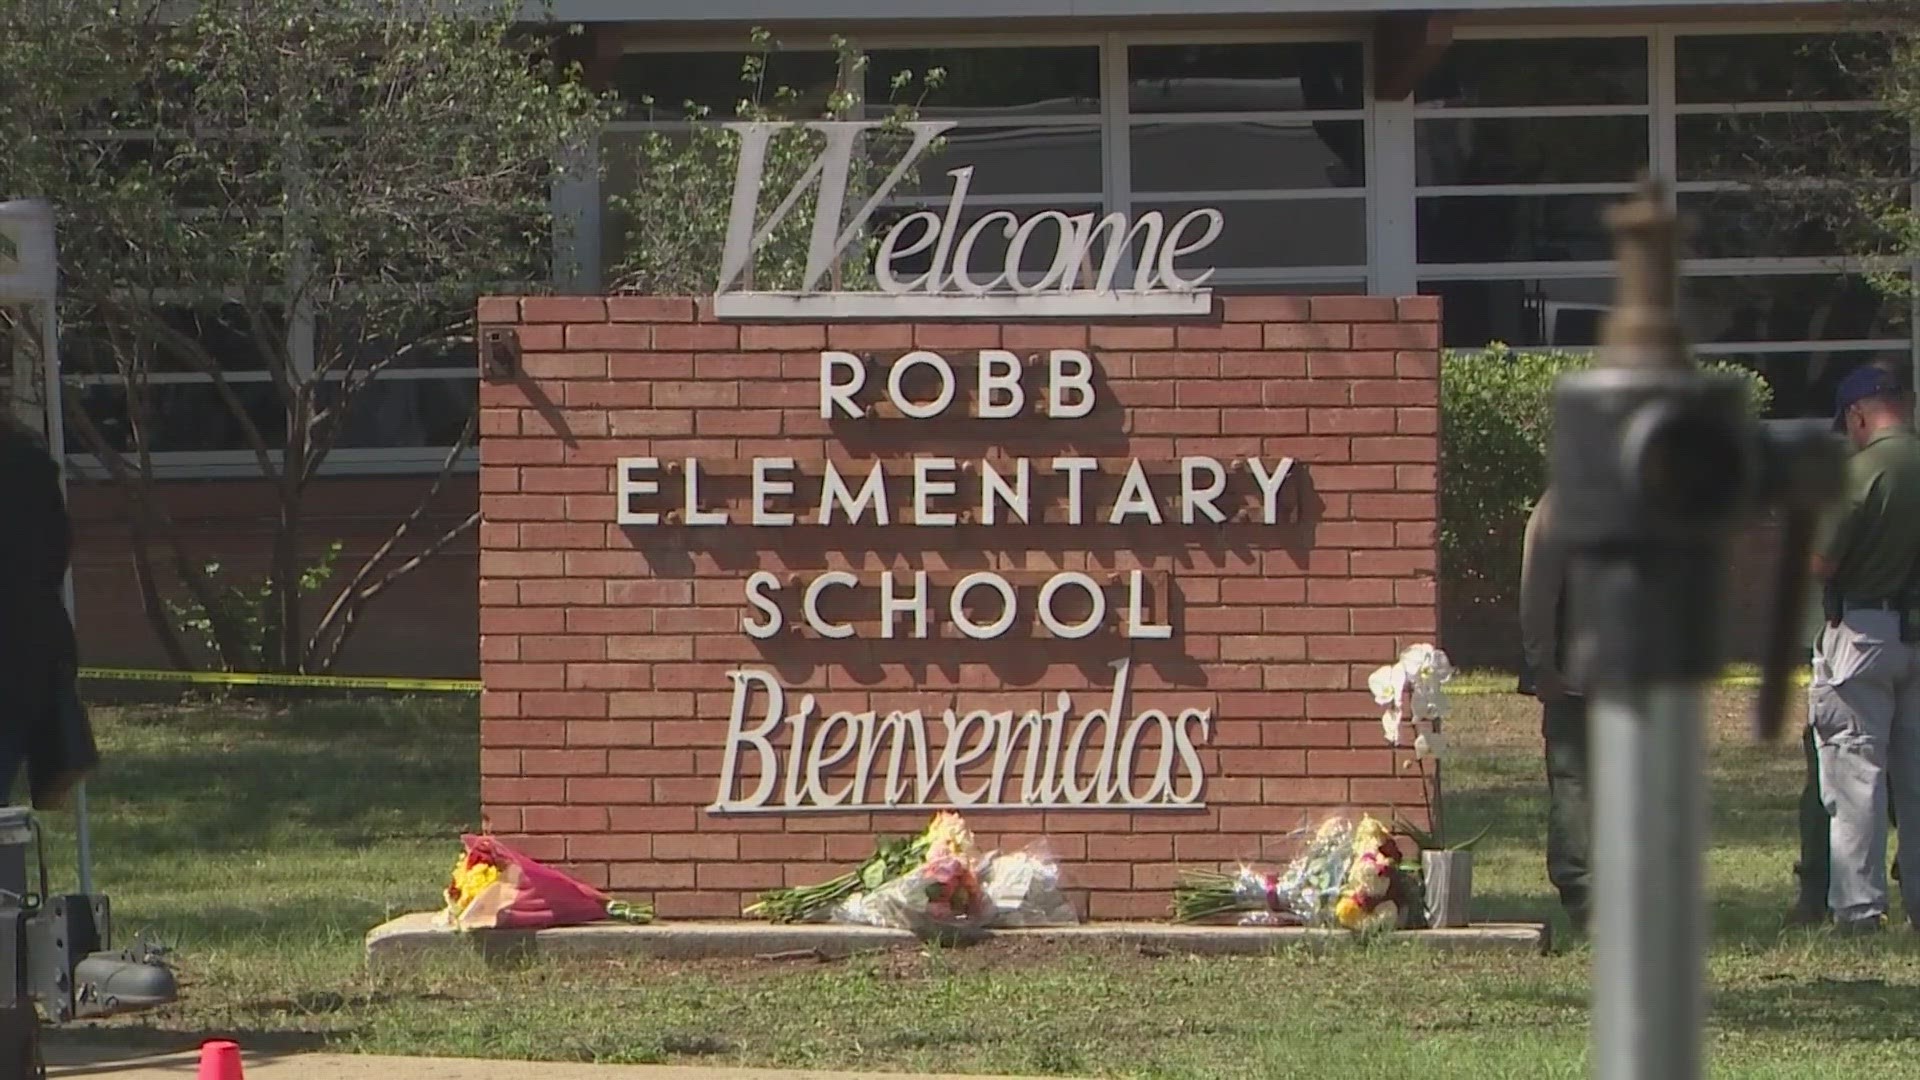 The Justice Department said the tragedy at Robb Elementary School was the result of a lack or urgency, leadership and communication.